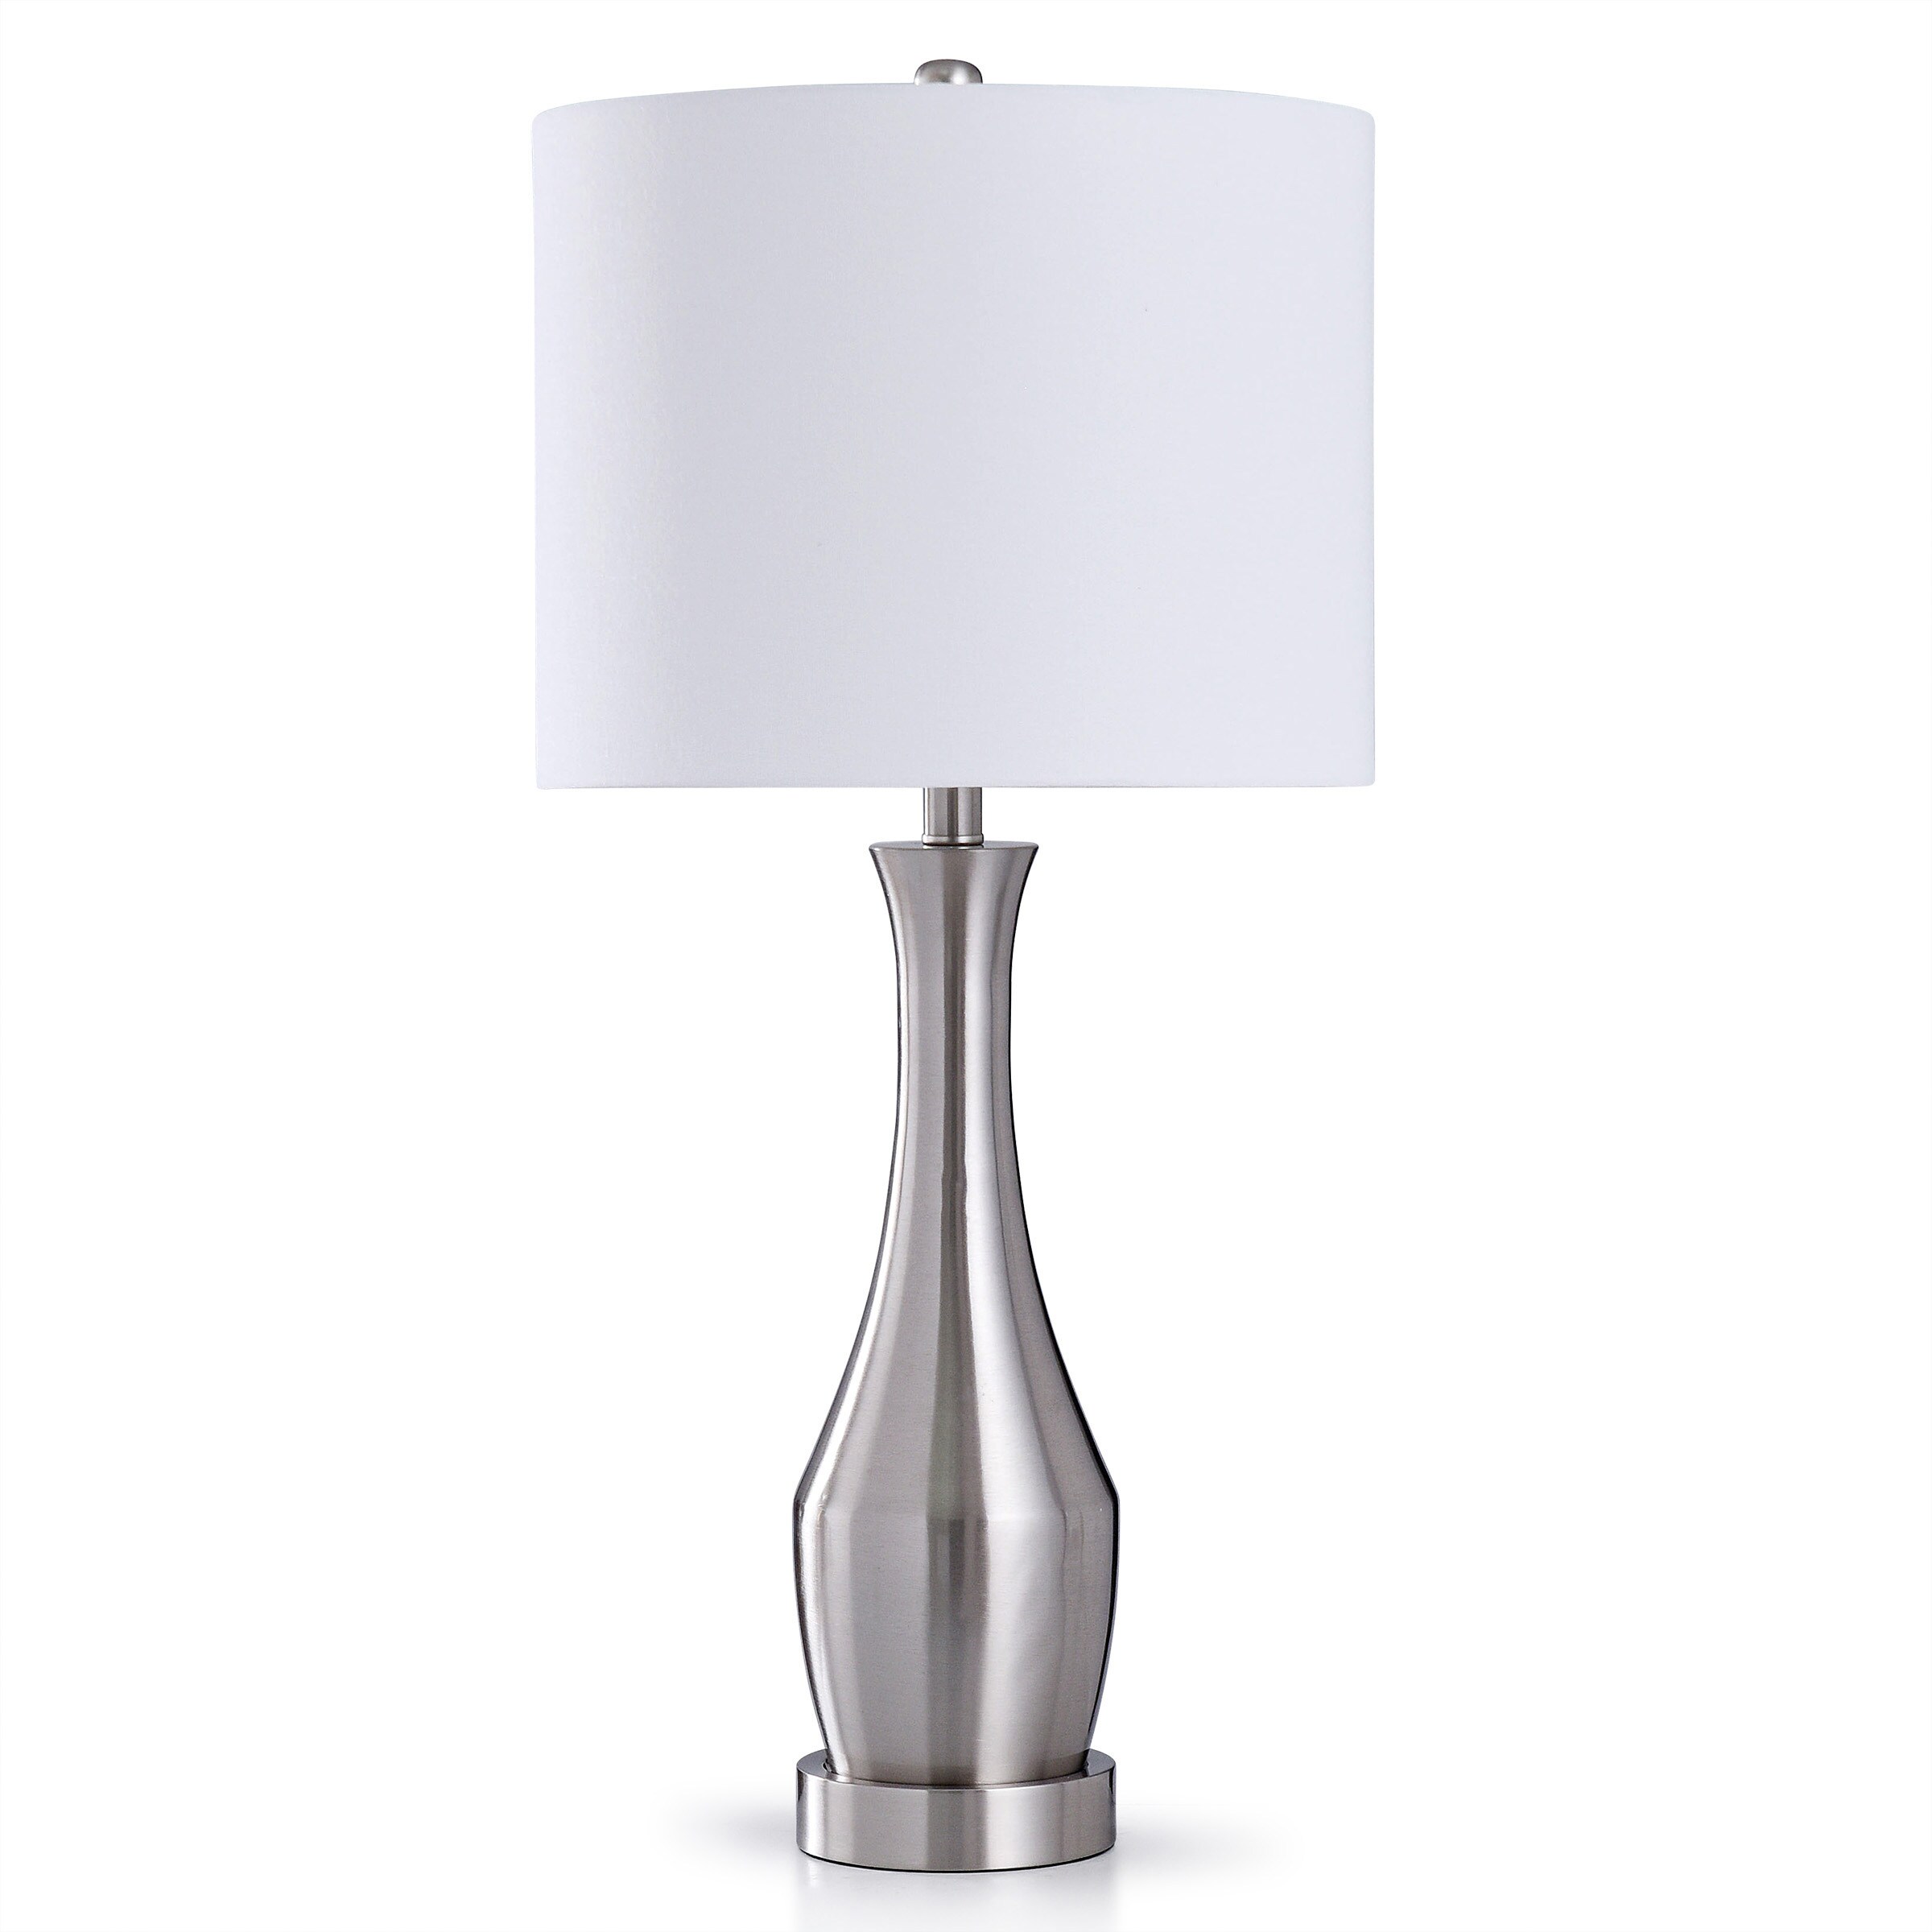 Modern Polished Chrome Touch Table Lamp Bedside Light with Glass Shades 